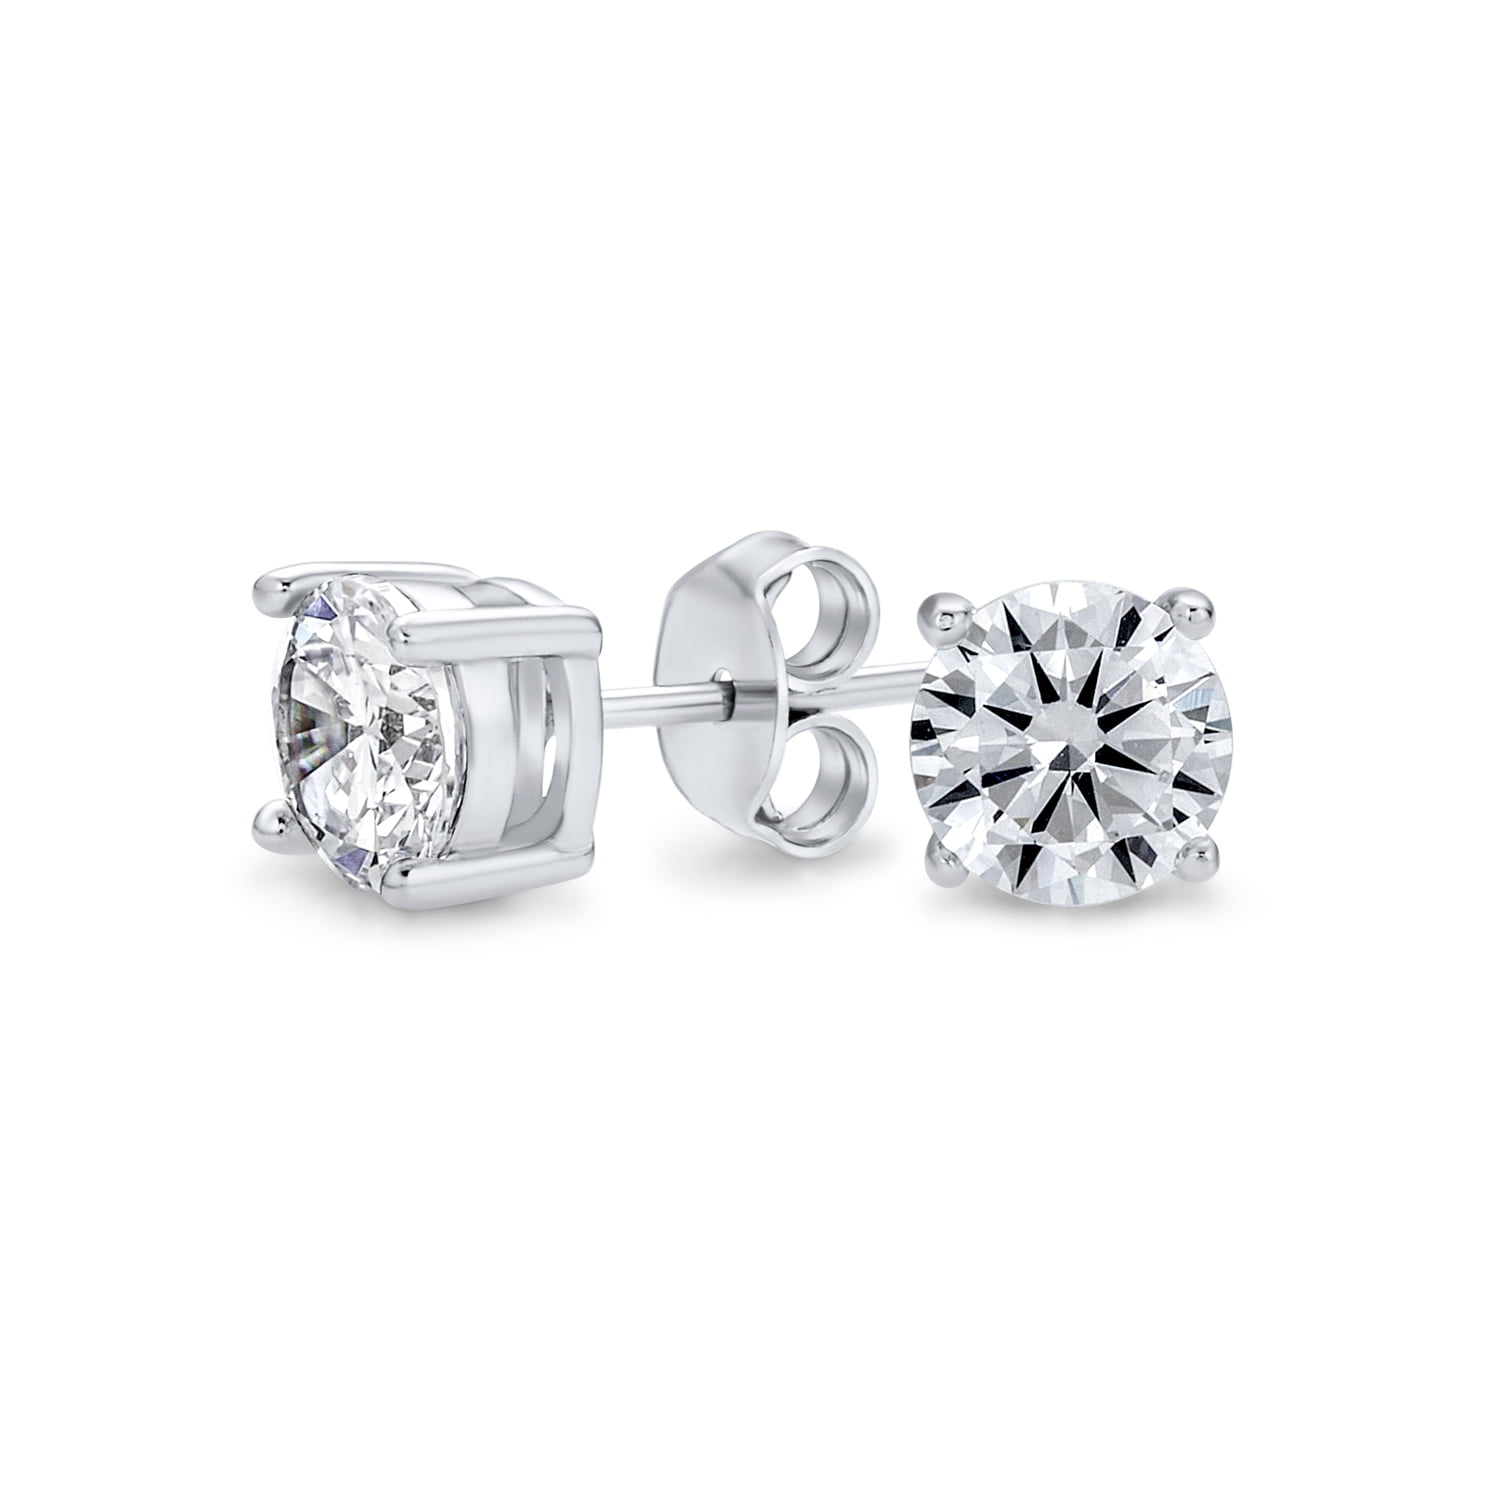 Solid 925 Sterling Silver 10mm Round 4 Prong CZ Cubic Zirconia Stud Earrings